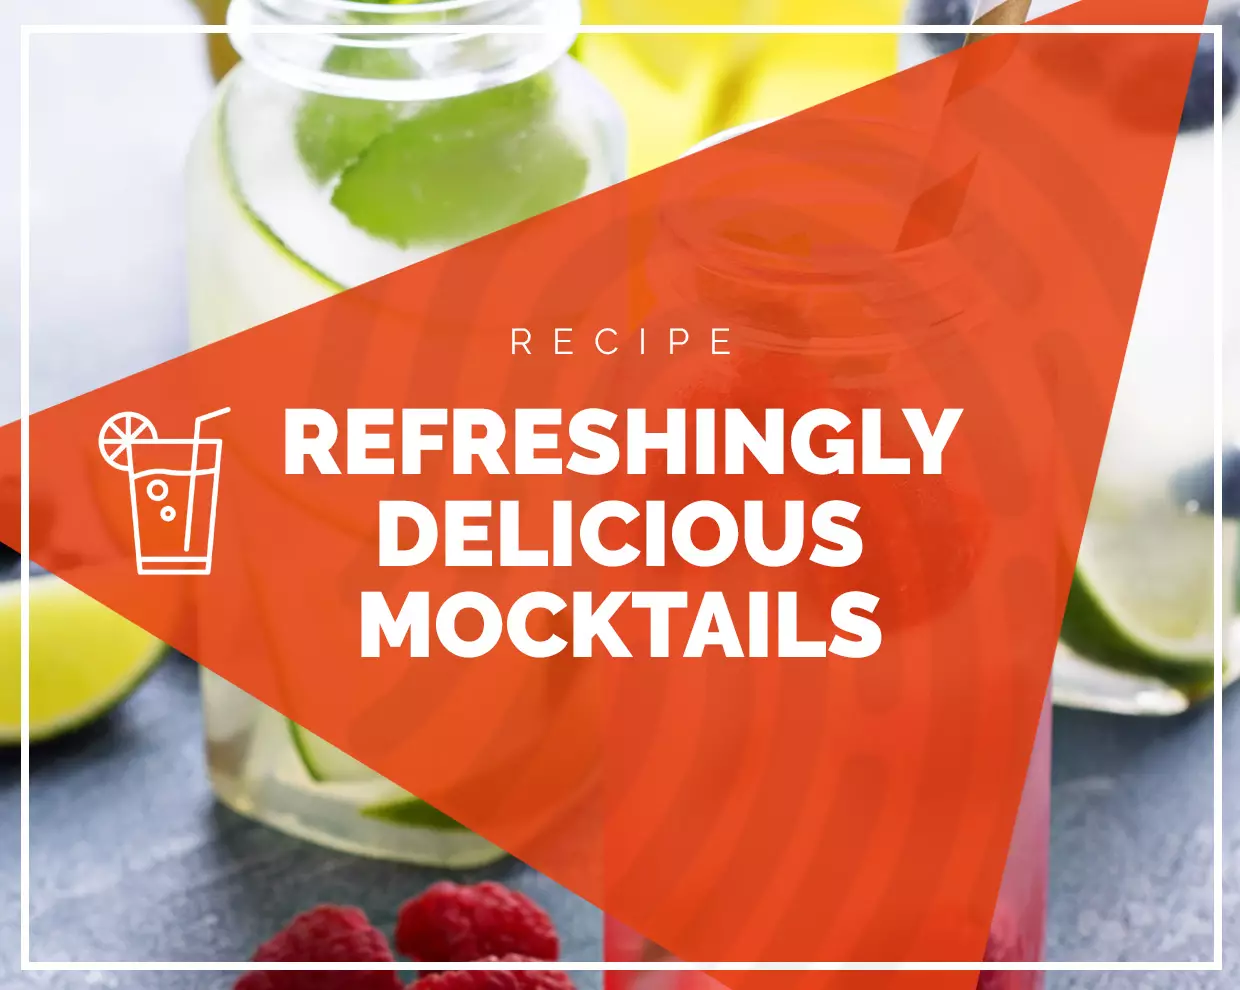 Refreshingly Delicious Mocktails